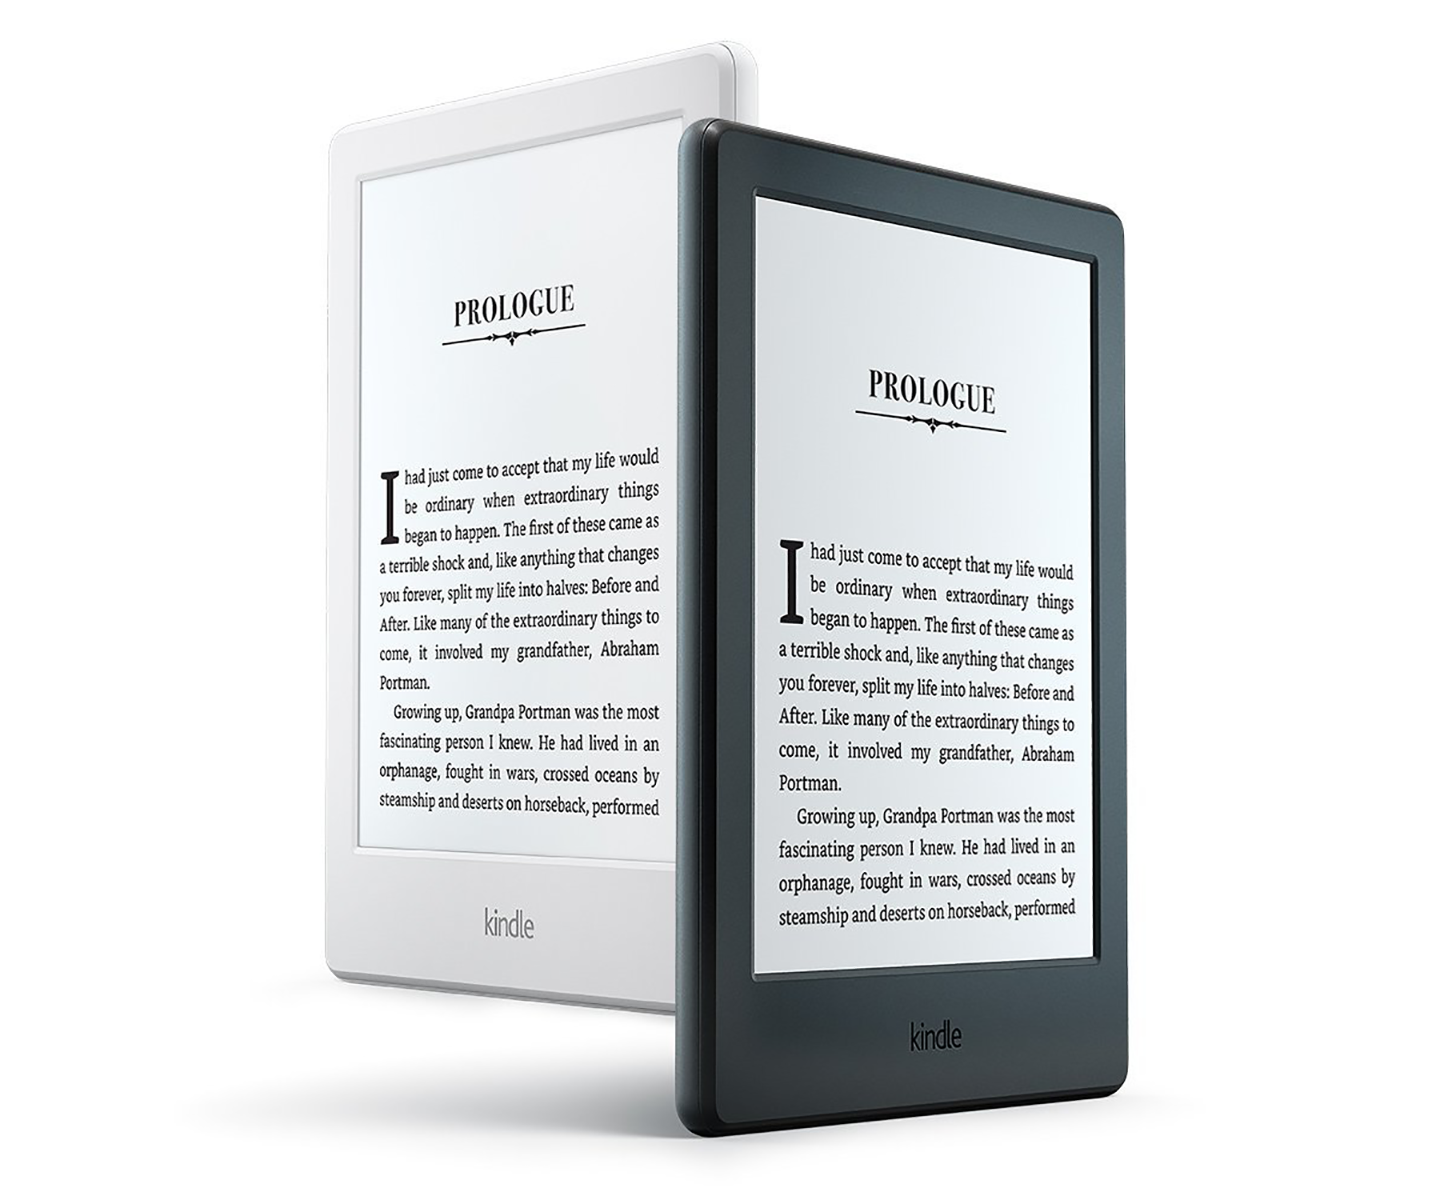 Amazon's new Kindle has a more rounded design, also comes in white